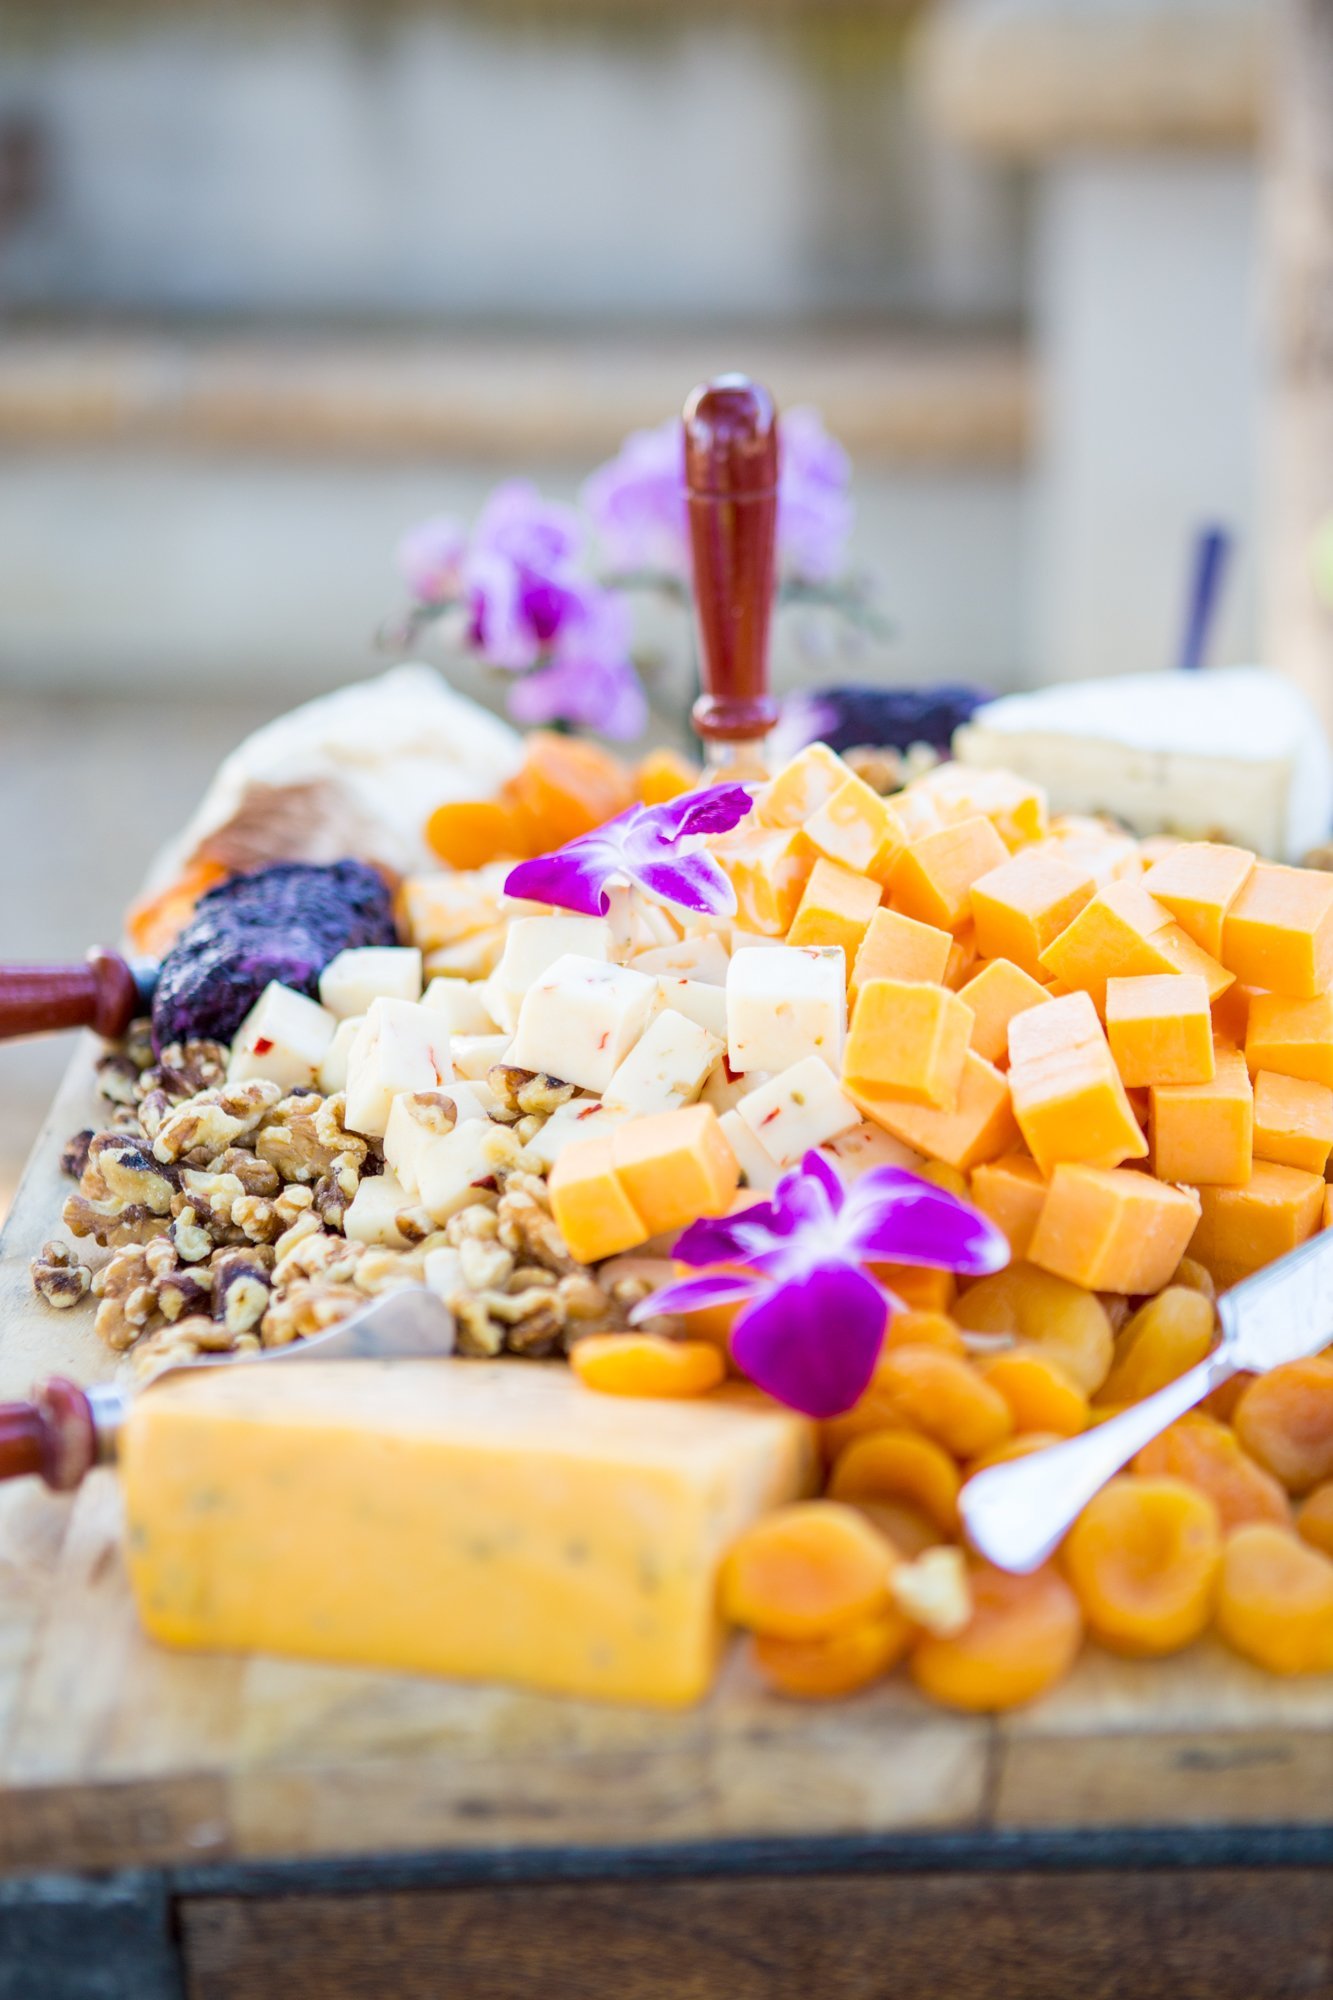 www.santabarbarawedding.com | Catering Connection | Karen D. Photography | Charcuterie Board with Cheese, Nuts, and Dried Fruit